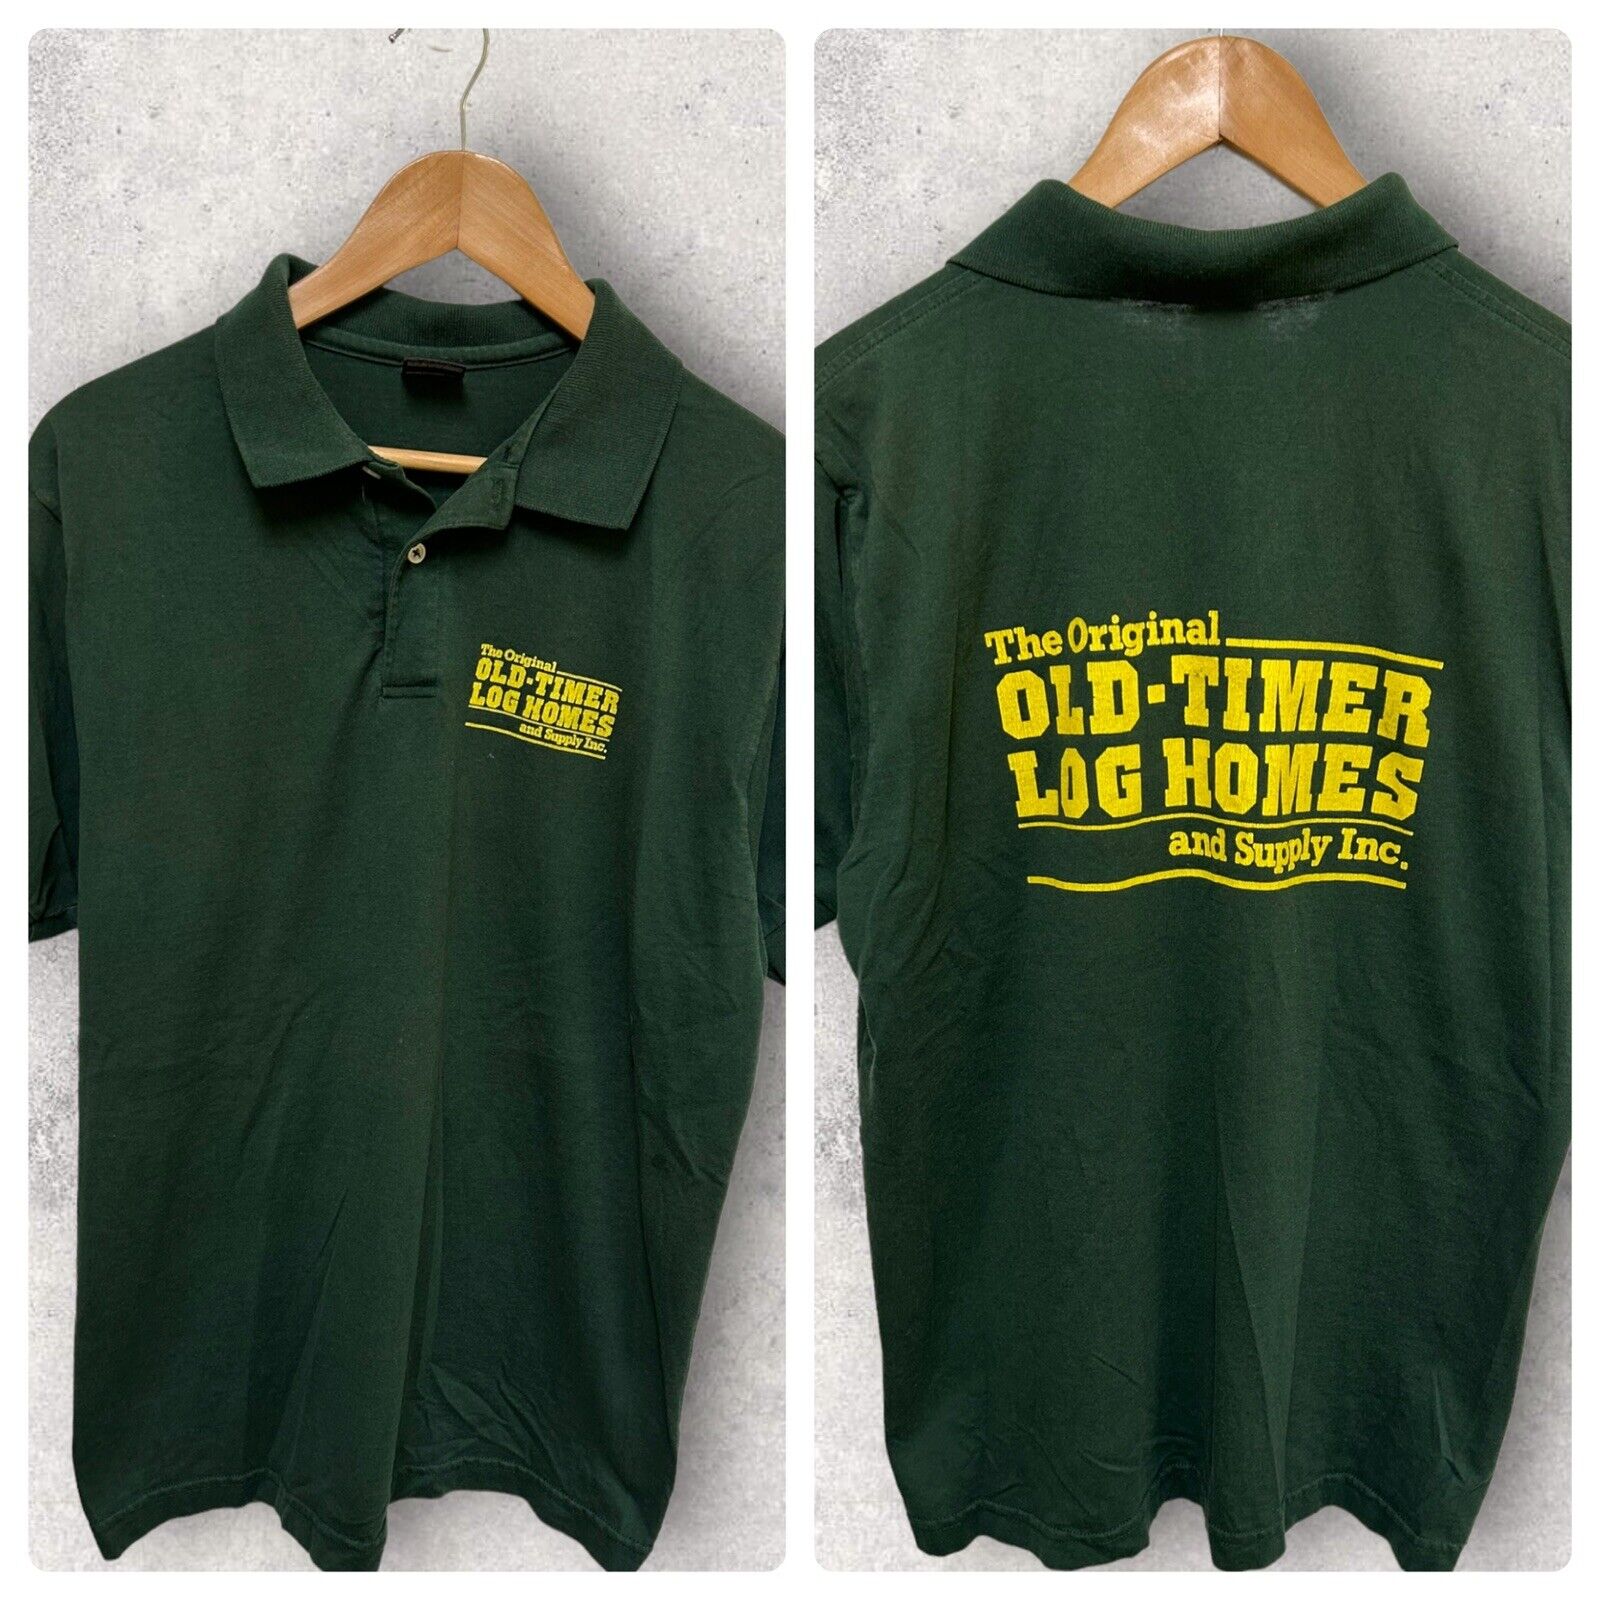 1994 Best Fruit of The Loom Log Homes Double Sided Graphic Shirt Green Large